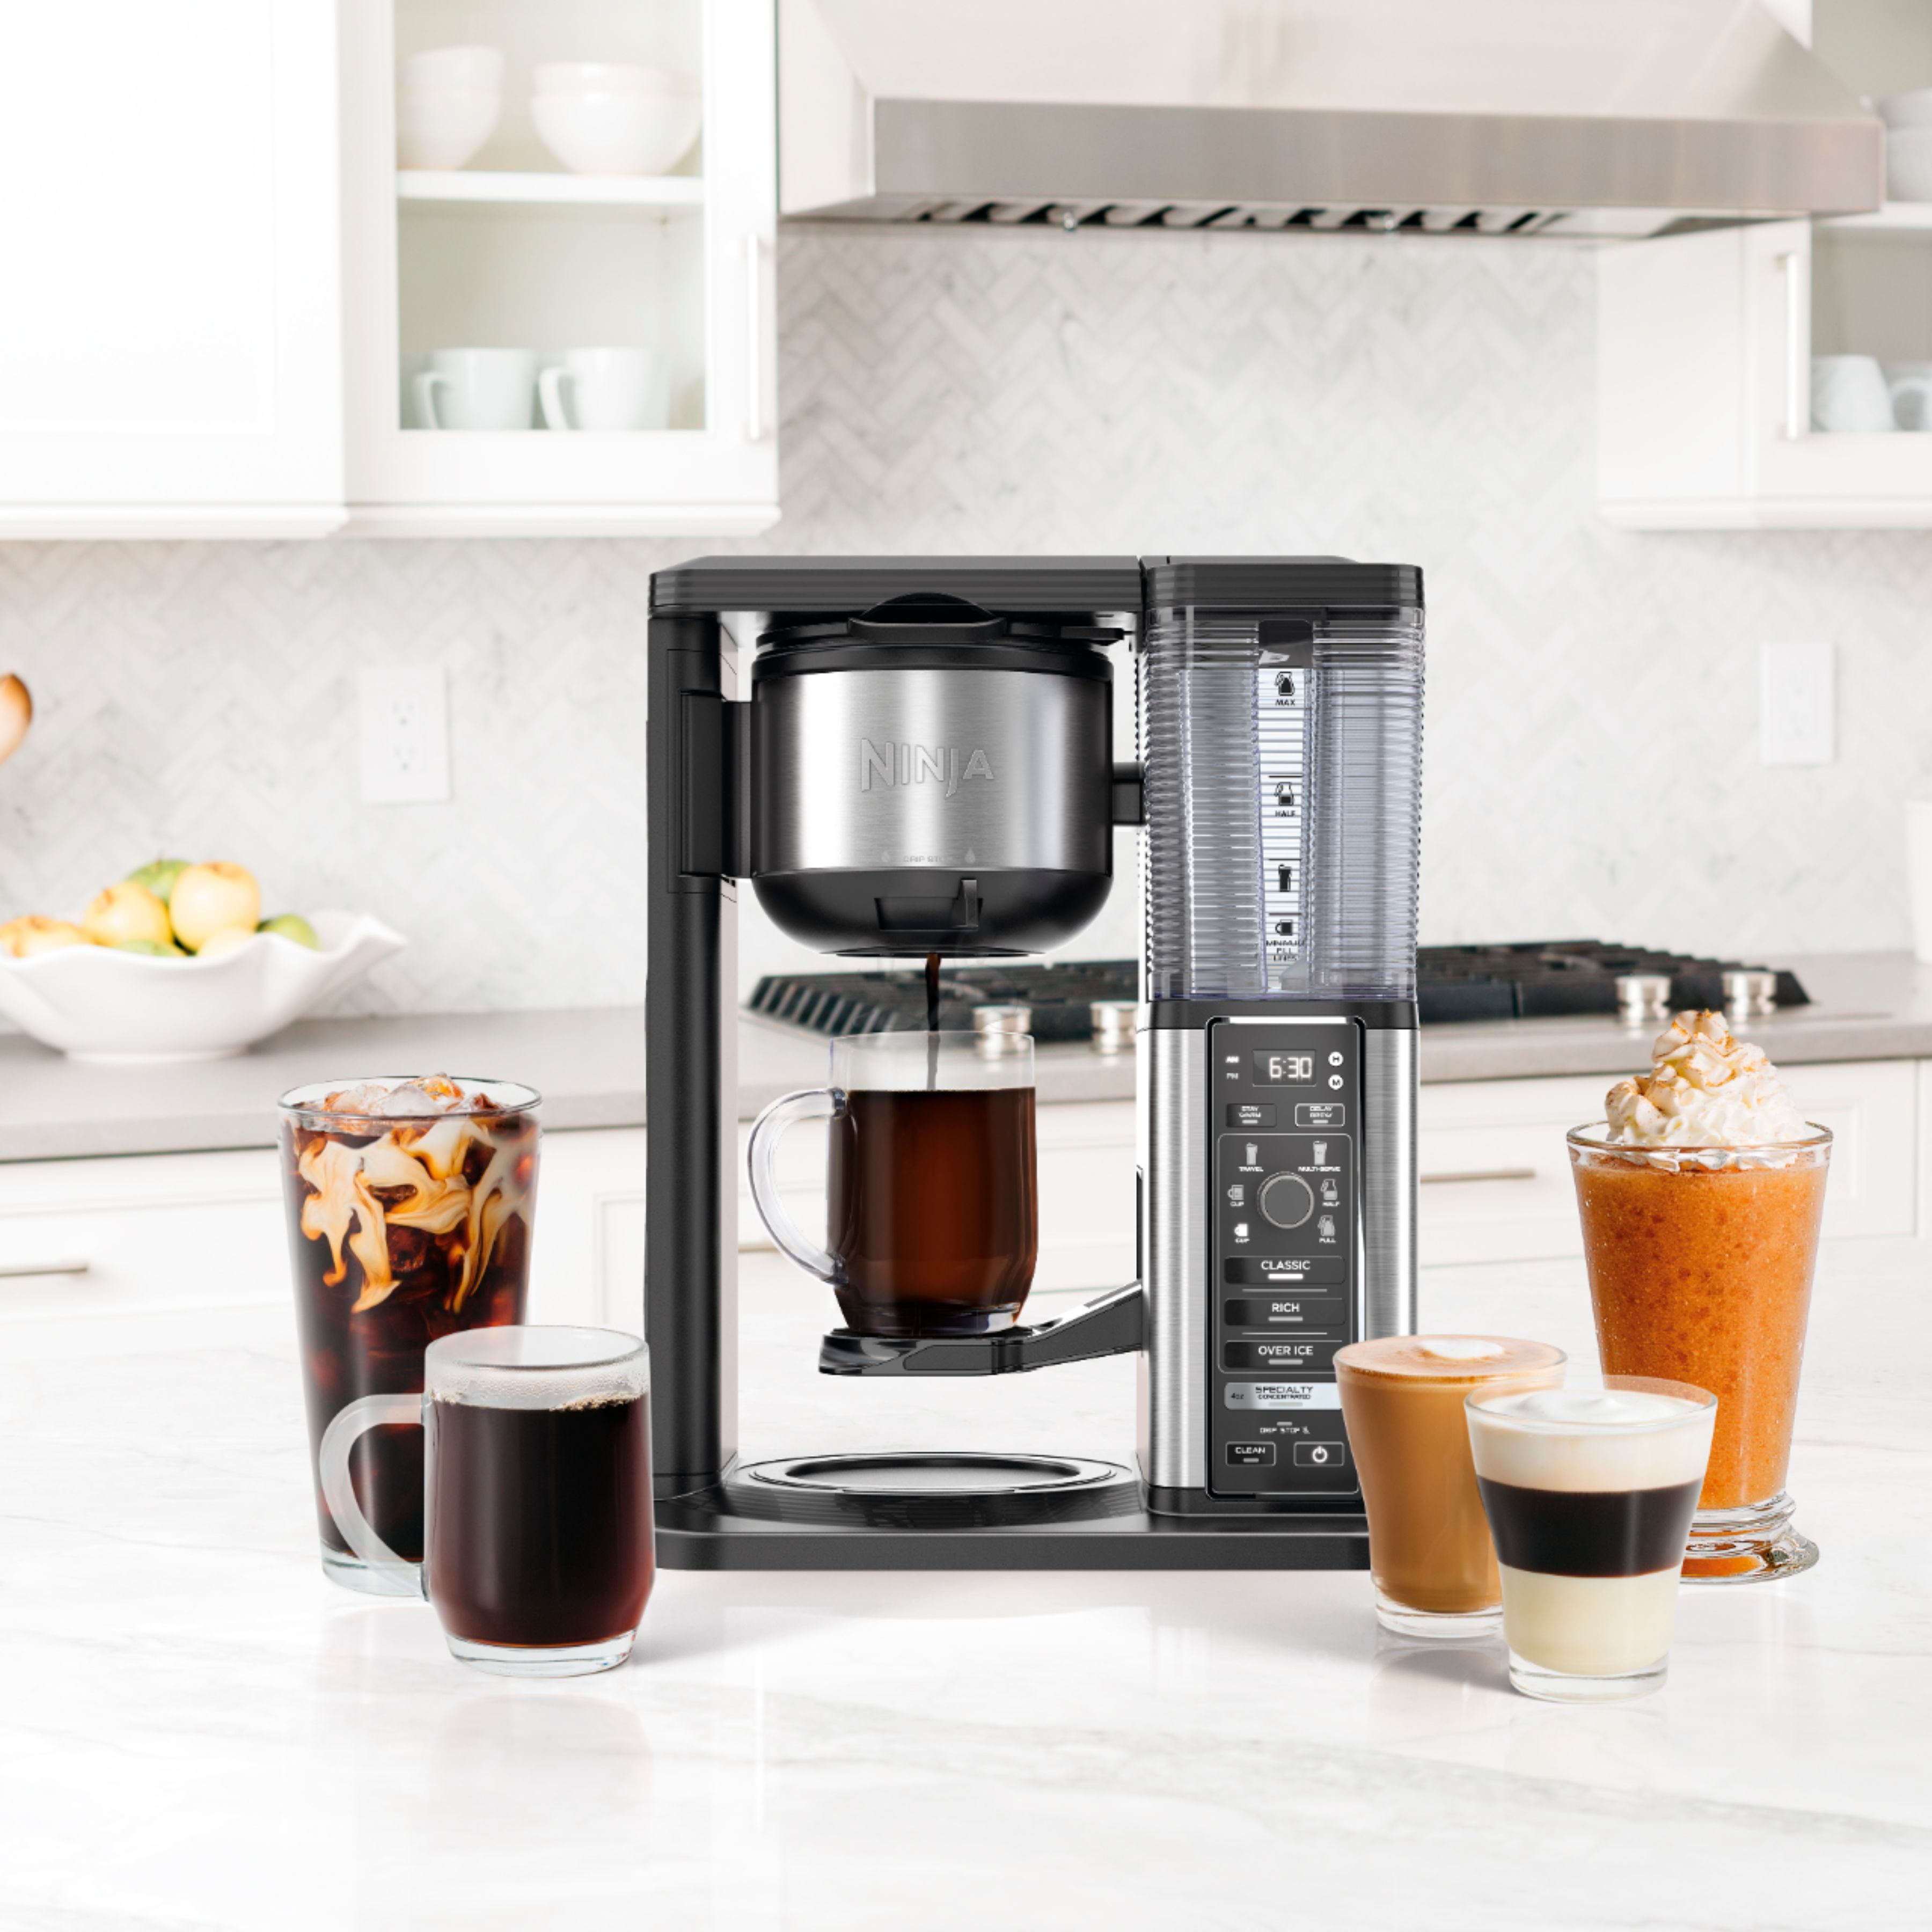 Ninja Barista System Just $179.99 Shipped on BestBuy.com (Reg. $280), Includes Fold-Away Frother